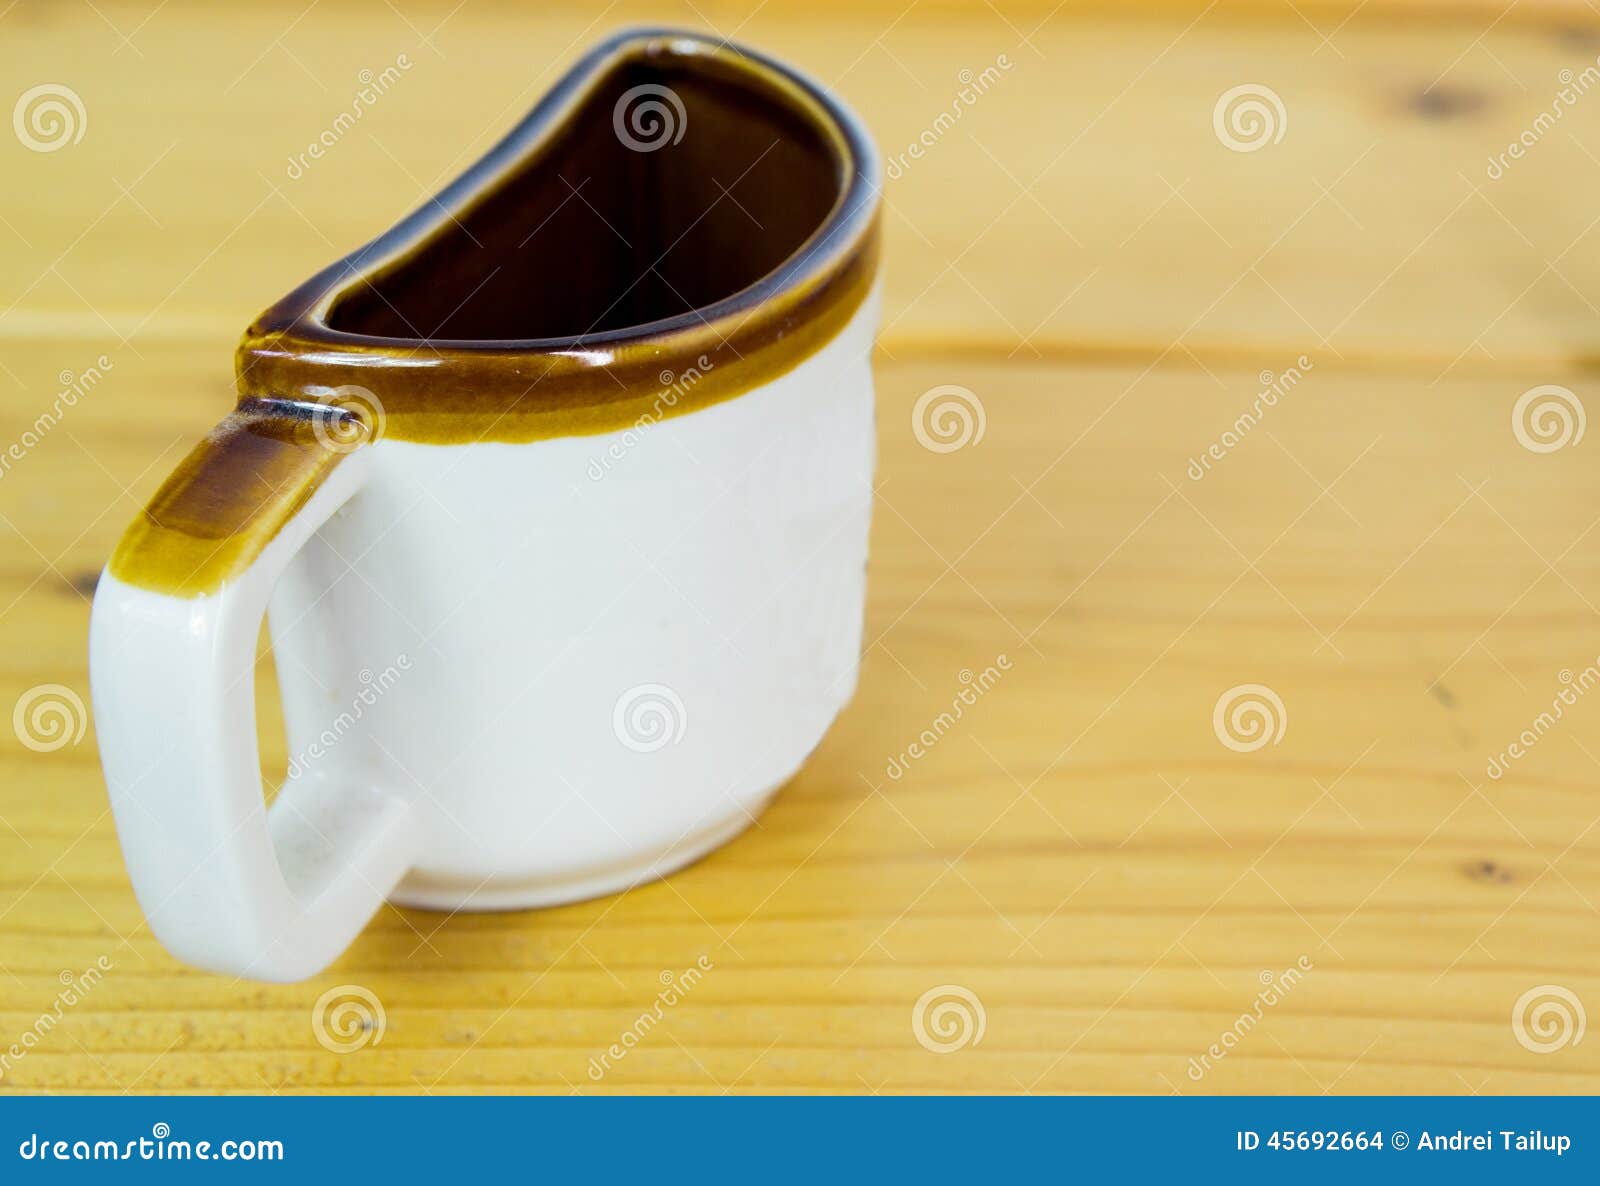 https://thumbs.dreamstime.com/z/half-cup-coffee-mug-white-brown-edge-wooden-texture-table-space-available-text-copy-space-available-45692664.jpg